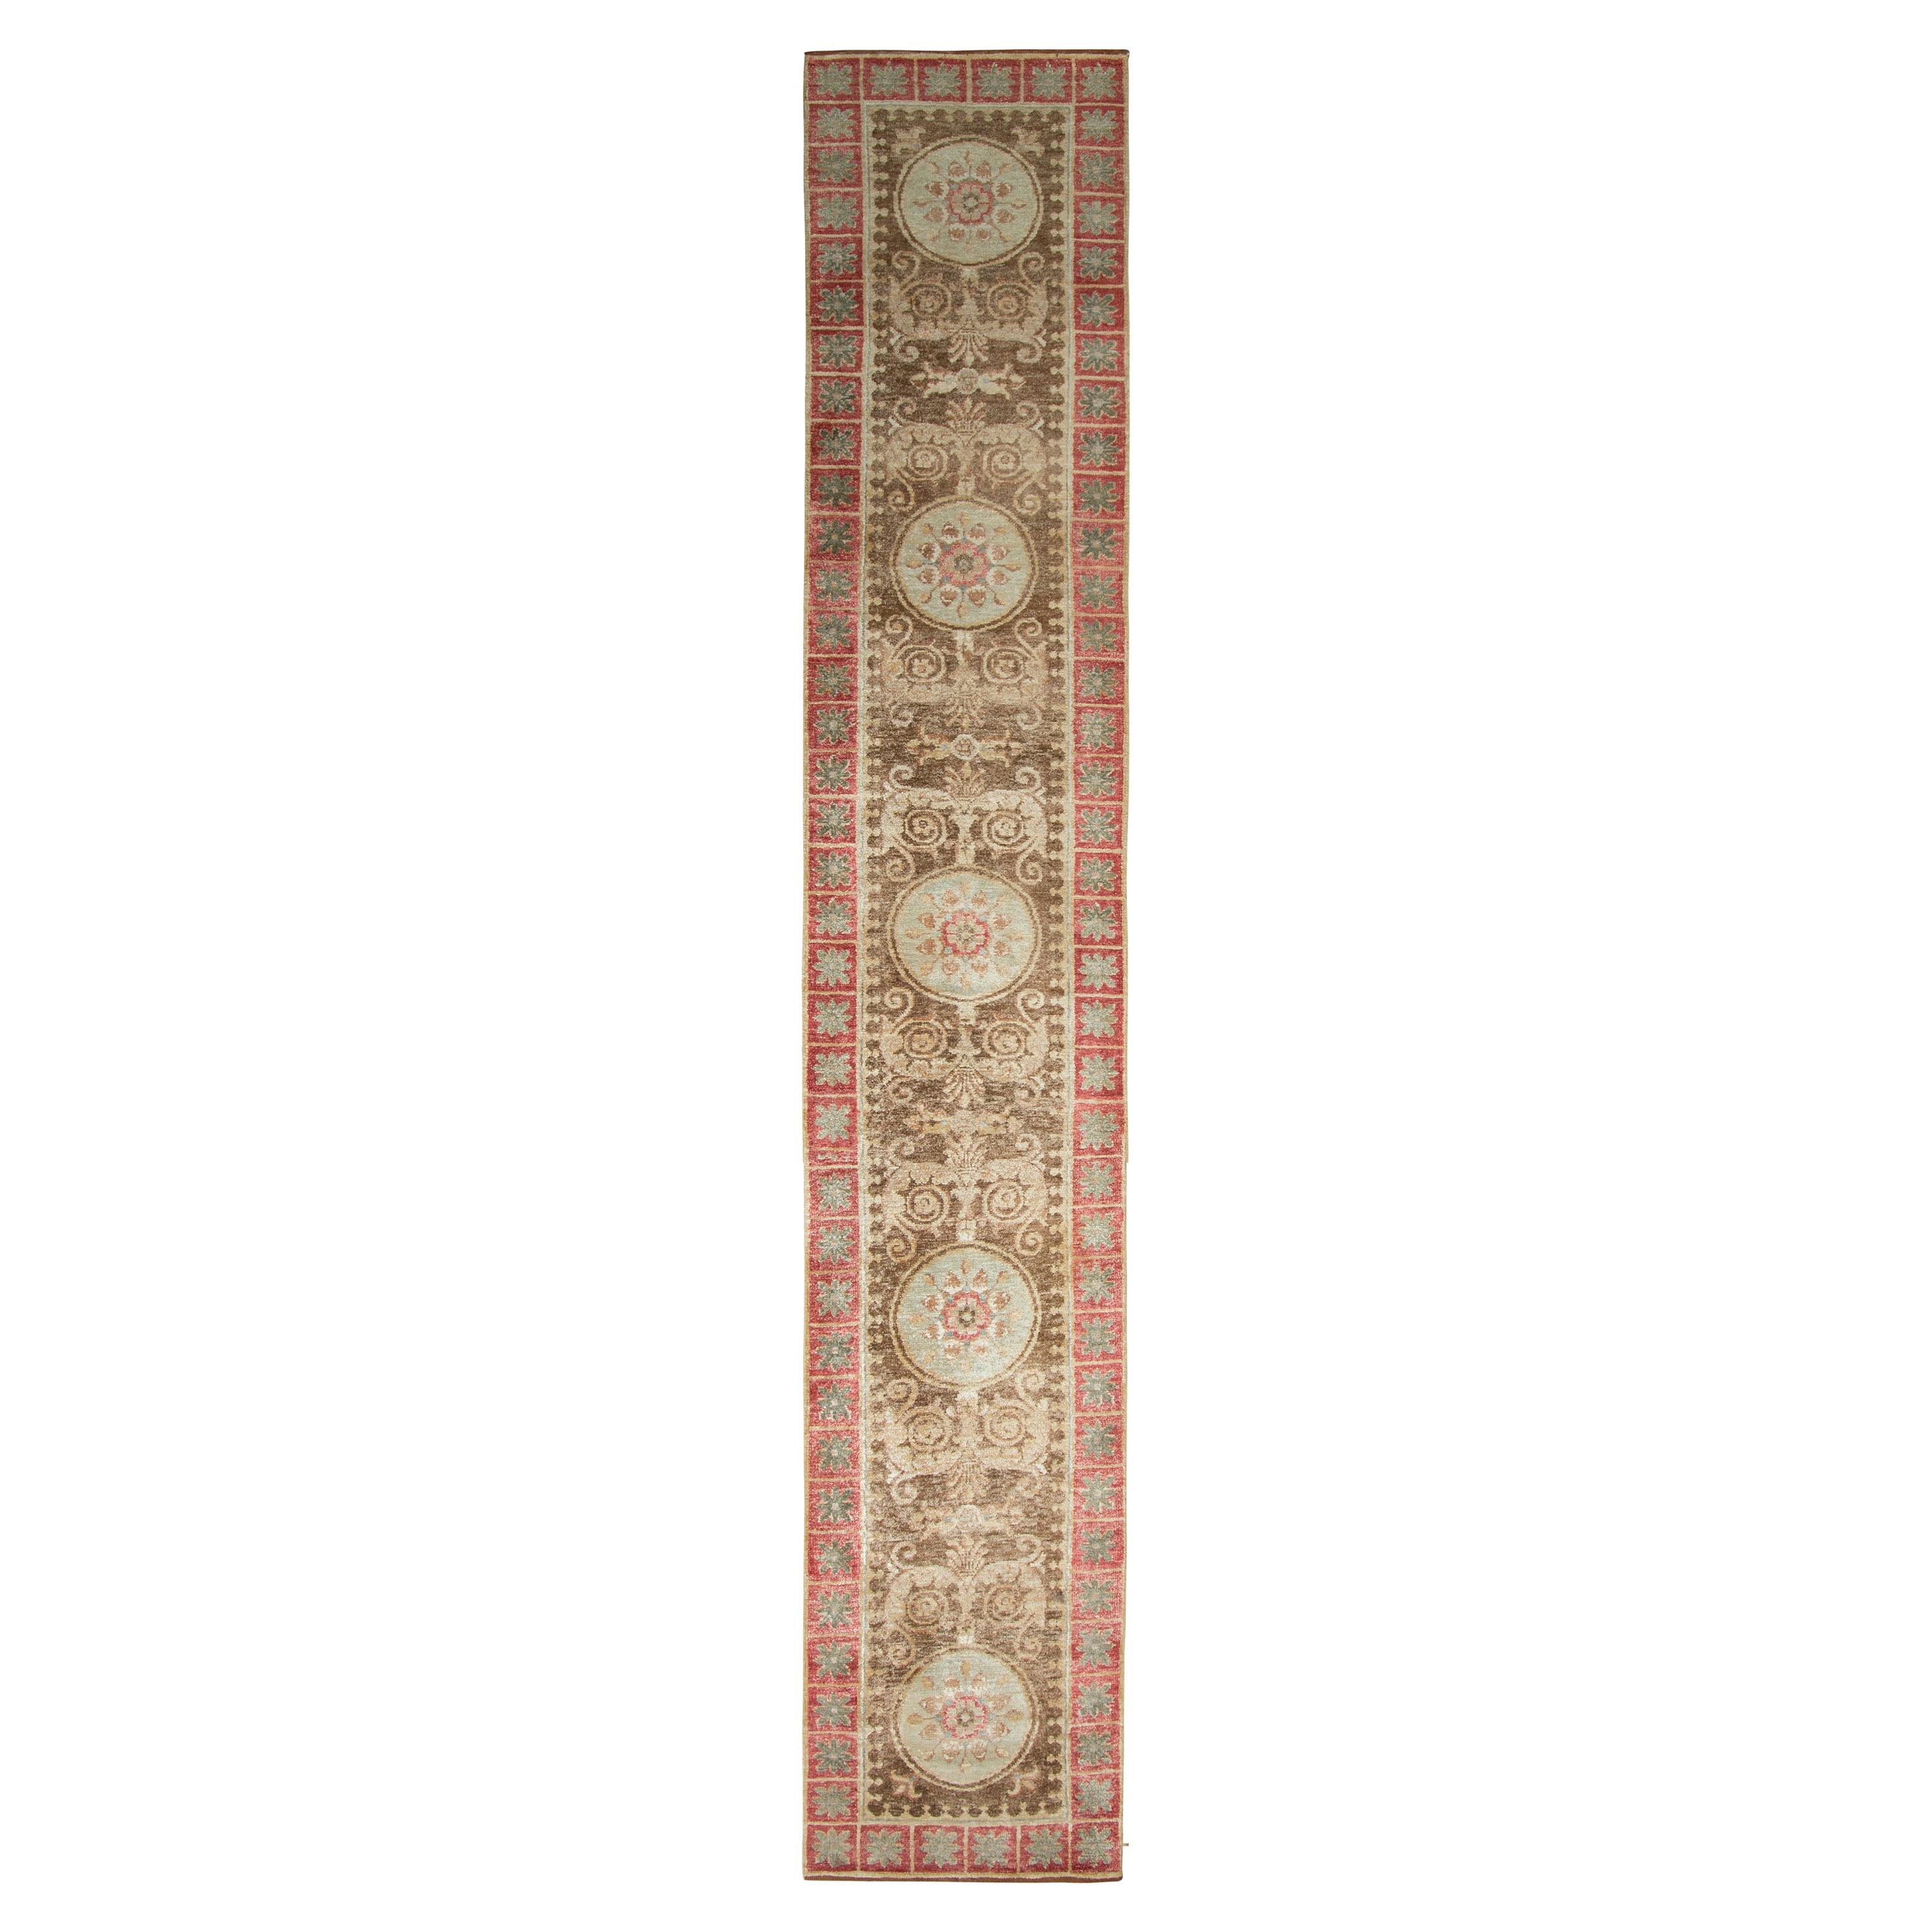 Rug & Kilim’s Transitional Style Rug in Beige-Brown and Red Medallion Pattern For Sale